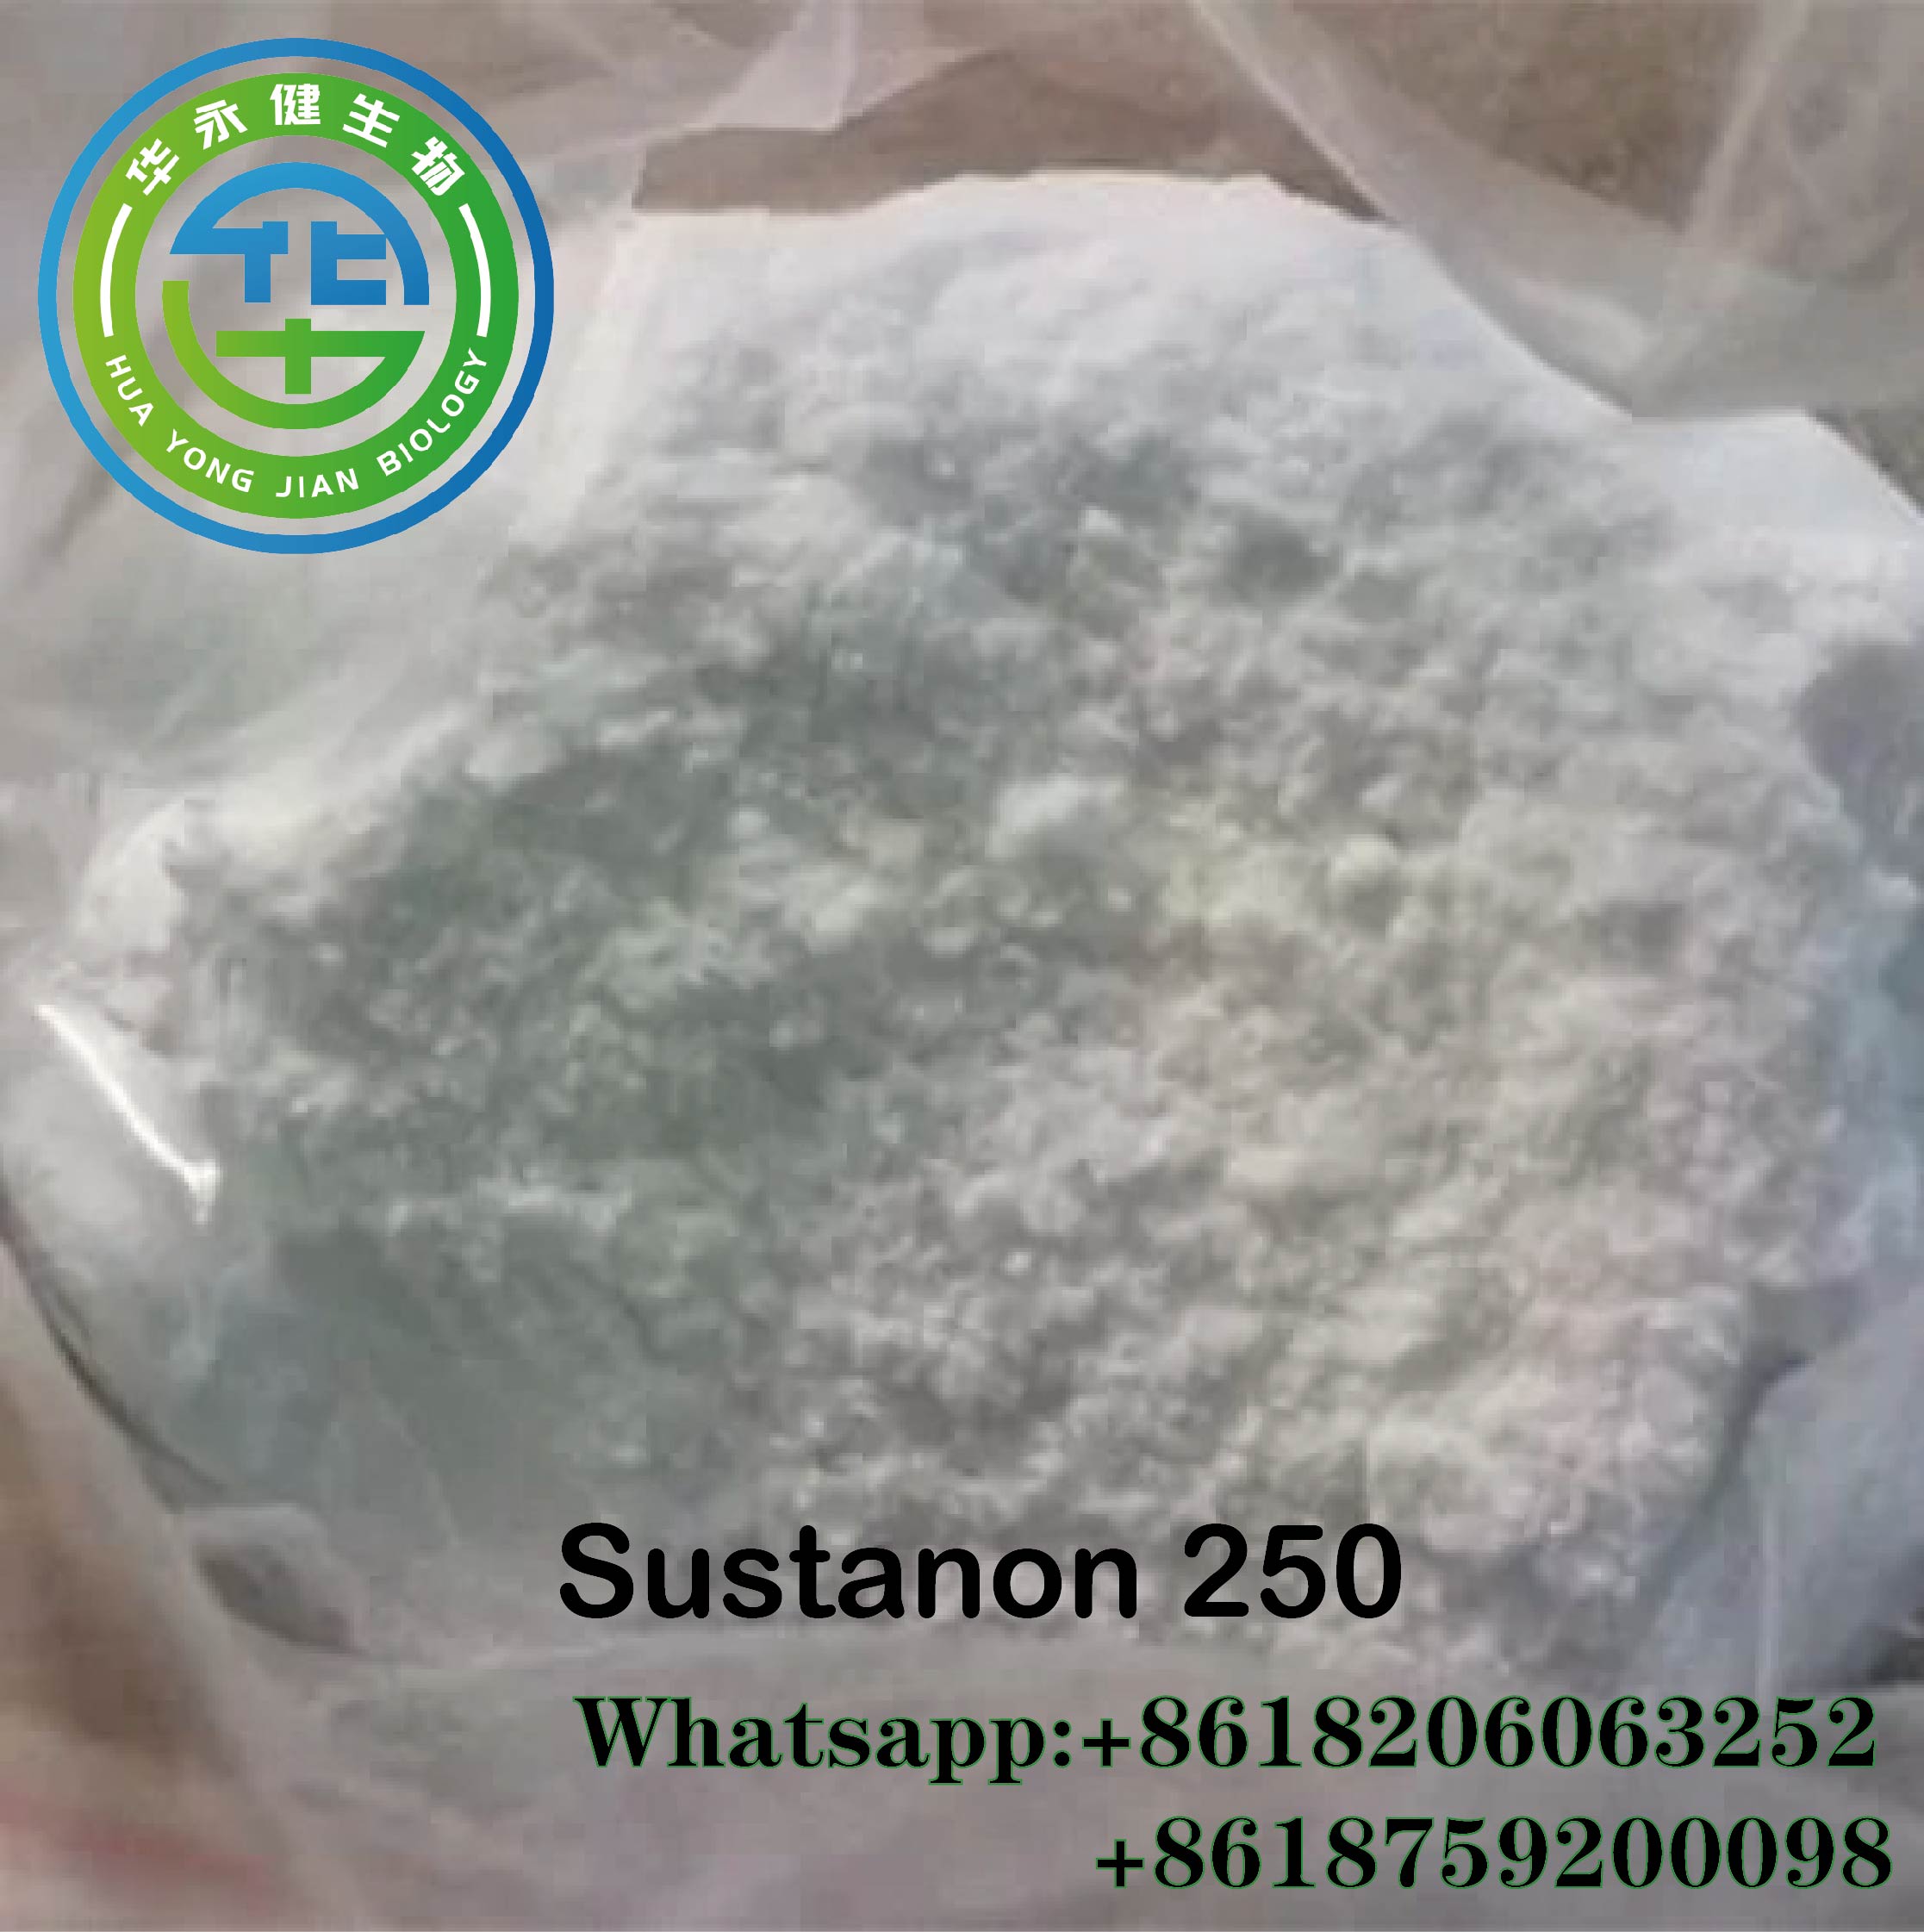 Hoʻonui Kāne S250 Oral Anabolic Steroid Testosterone Sustanon 250 Muscle Growth Steroids Powder Featured Image